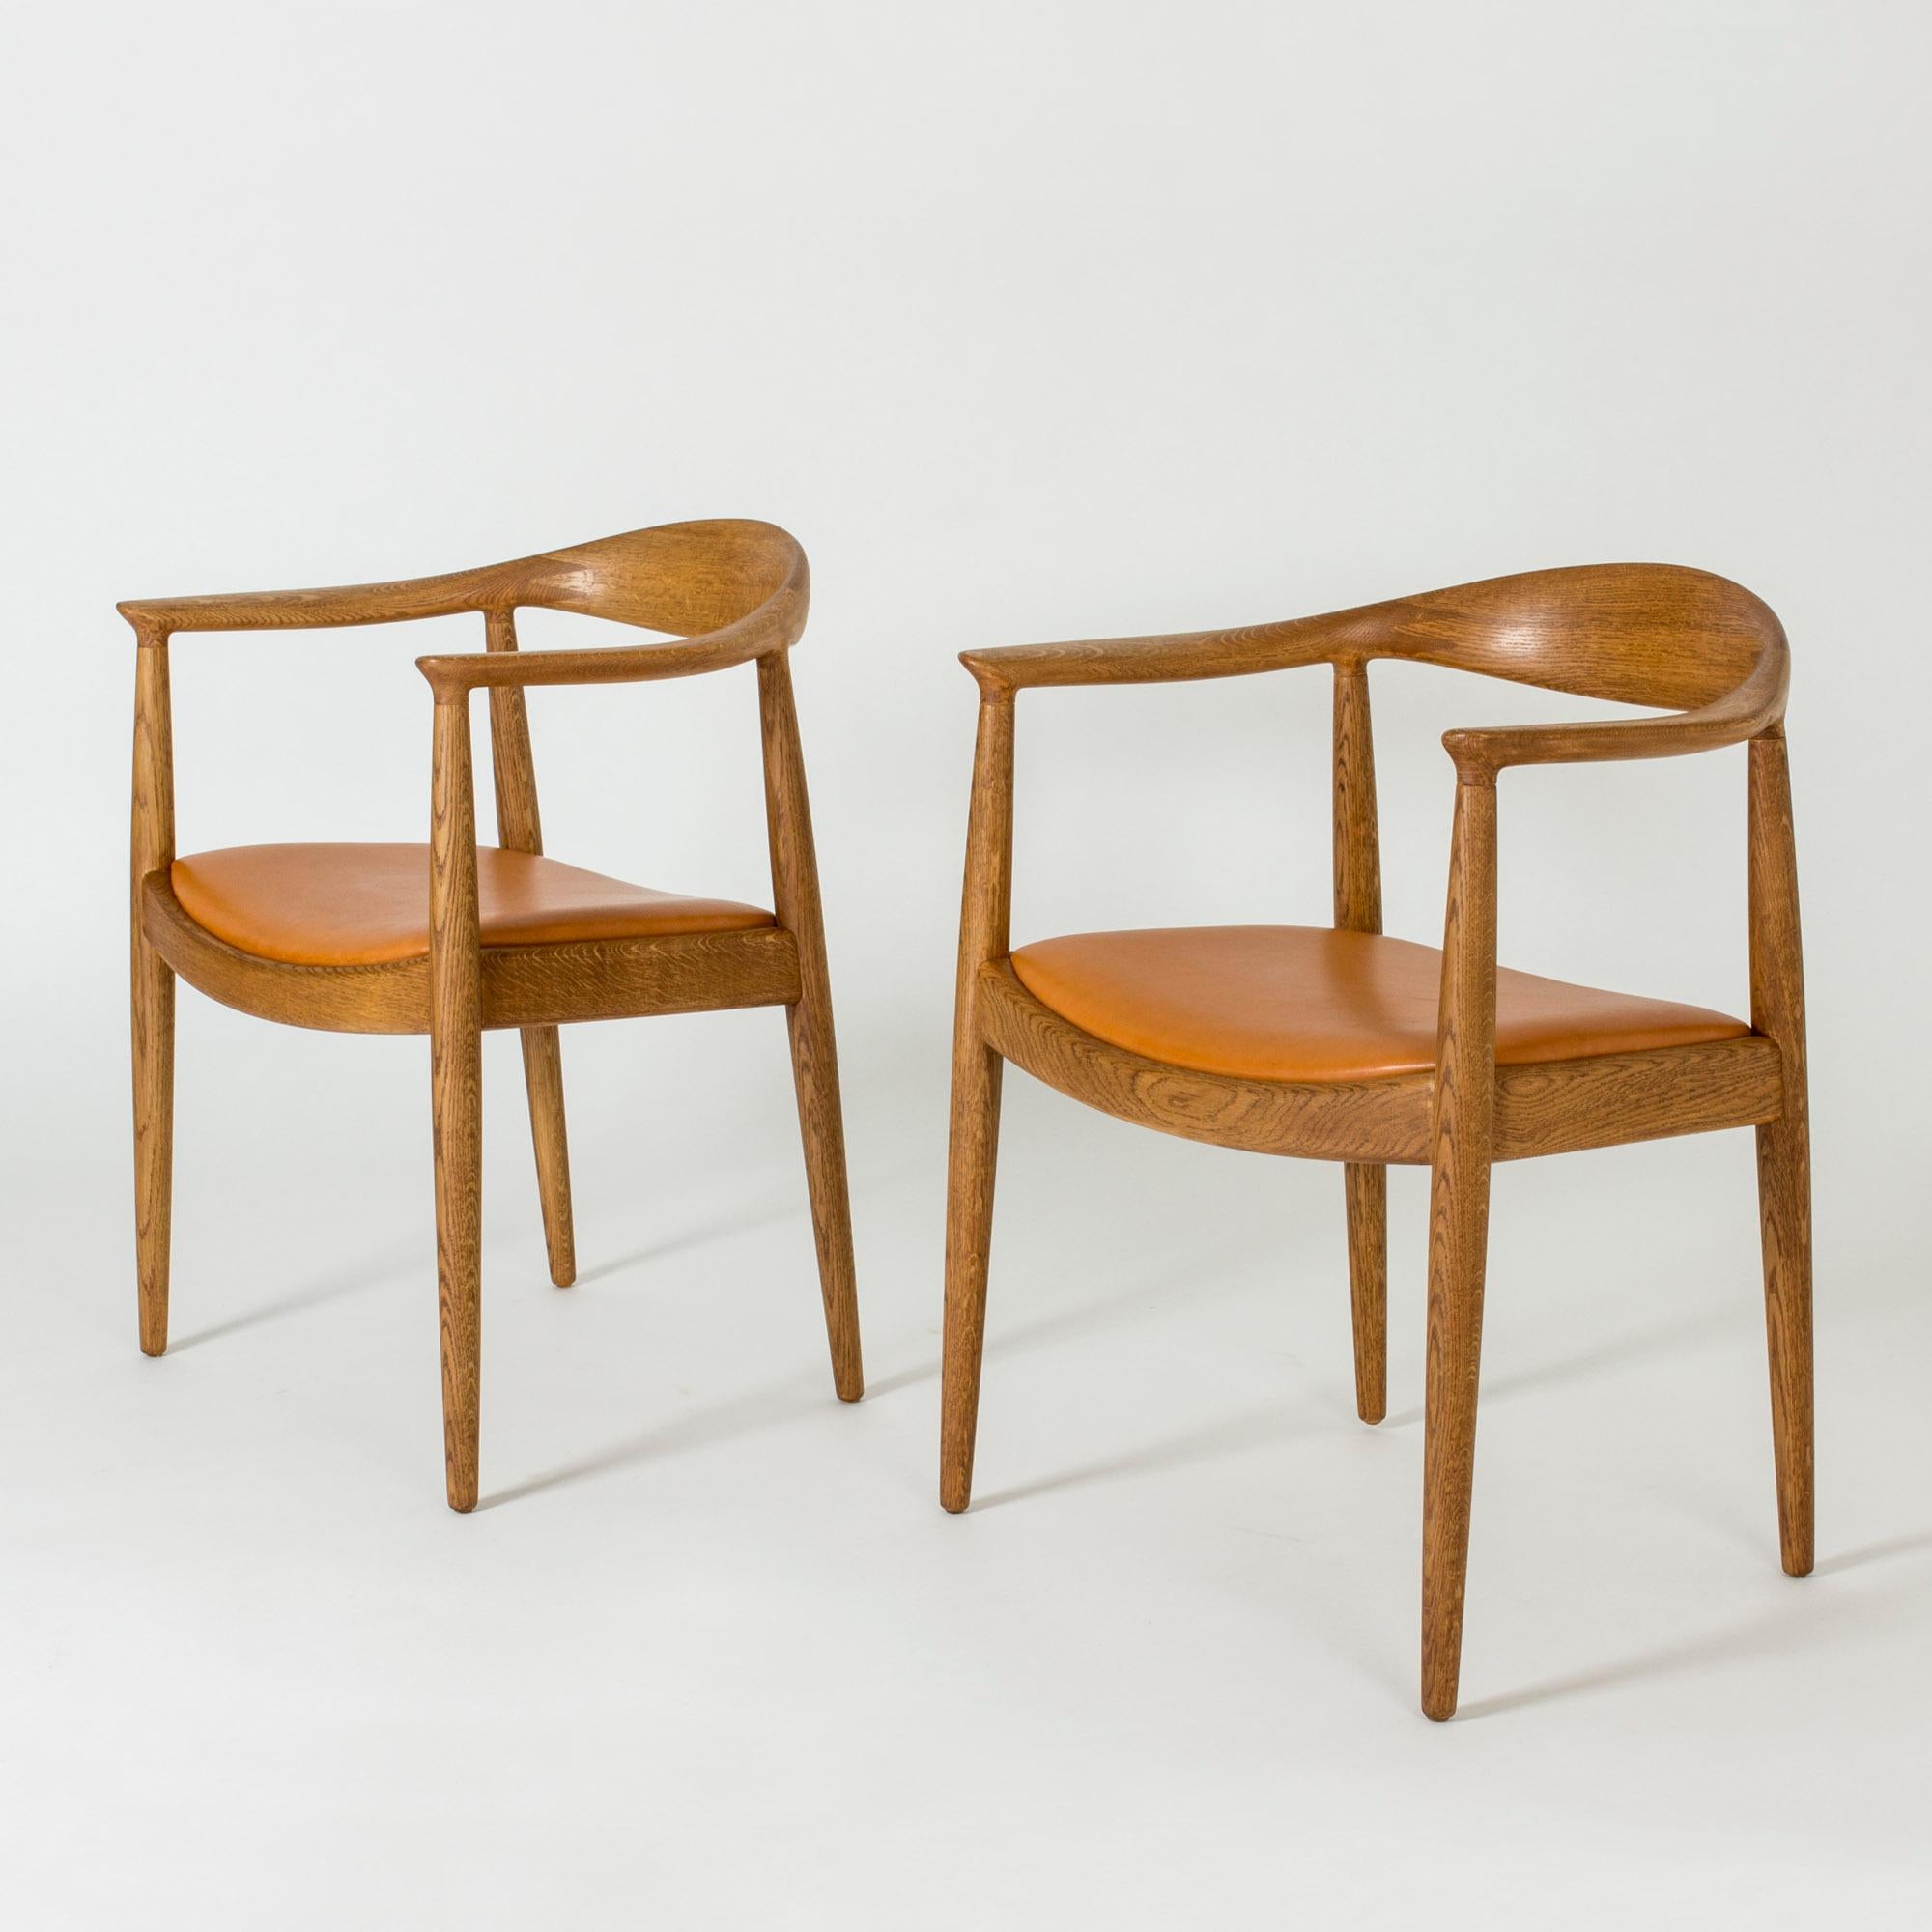 Pair of beautiful oak and leather “The Chair” by Hans J. Wegner. Smooth wood with striking woodgrain.
“The Chair” was designed in 1949 and quickly became a huge success. The model was important in advocating Danish design internationally. Its